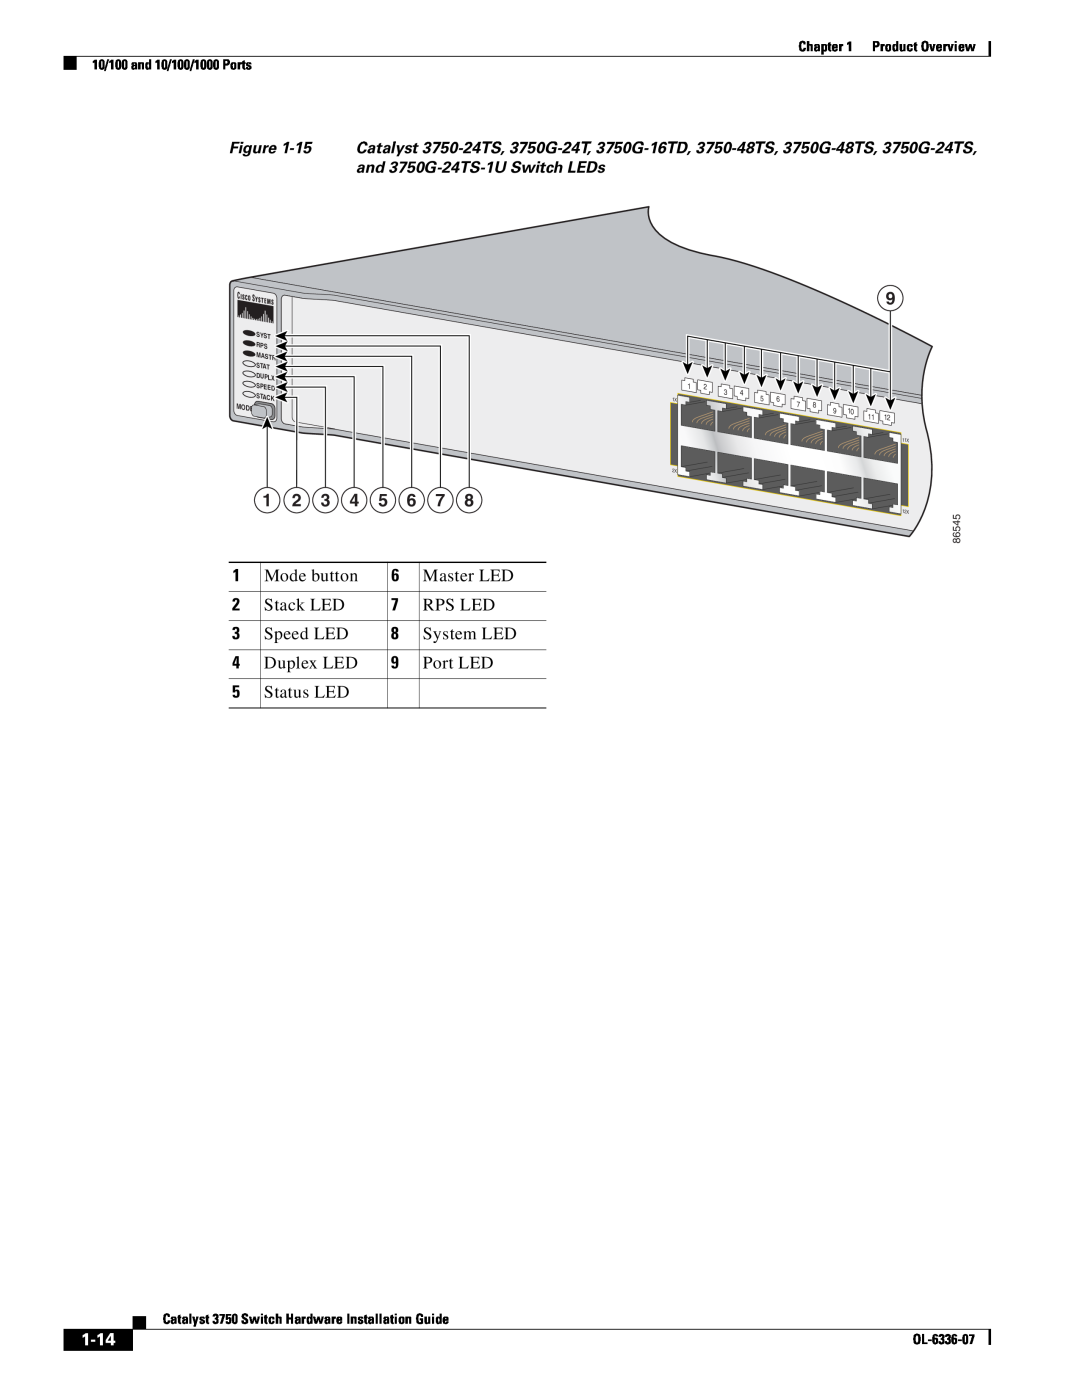 Cisco Systems WSC3750X24TS 1-14, Product Overview 10/100 and 10/100/1000 Ports, OL-6336-07, 86545, Syst, Stat, Duplx, Mode 